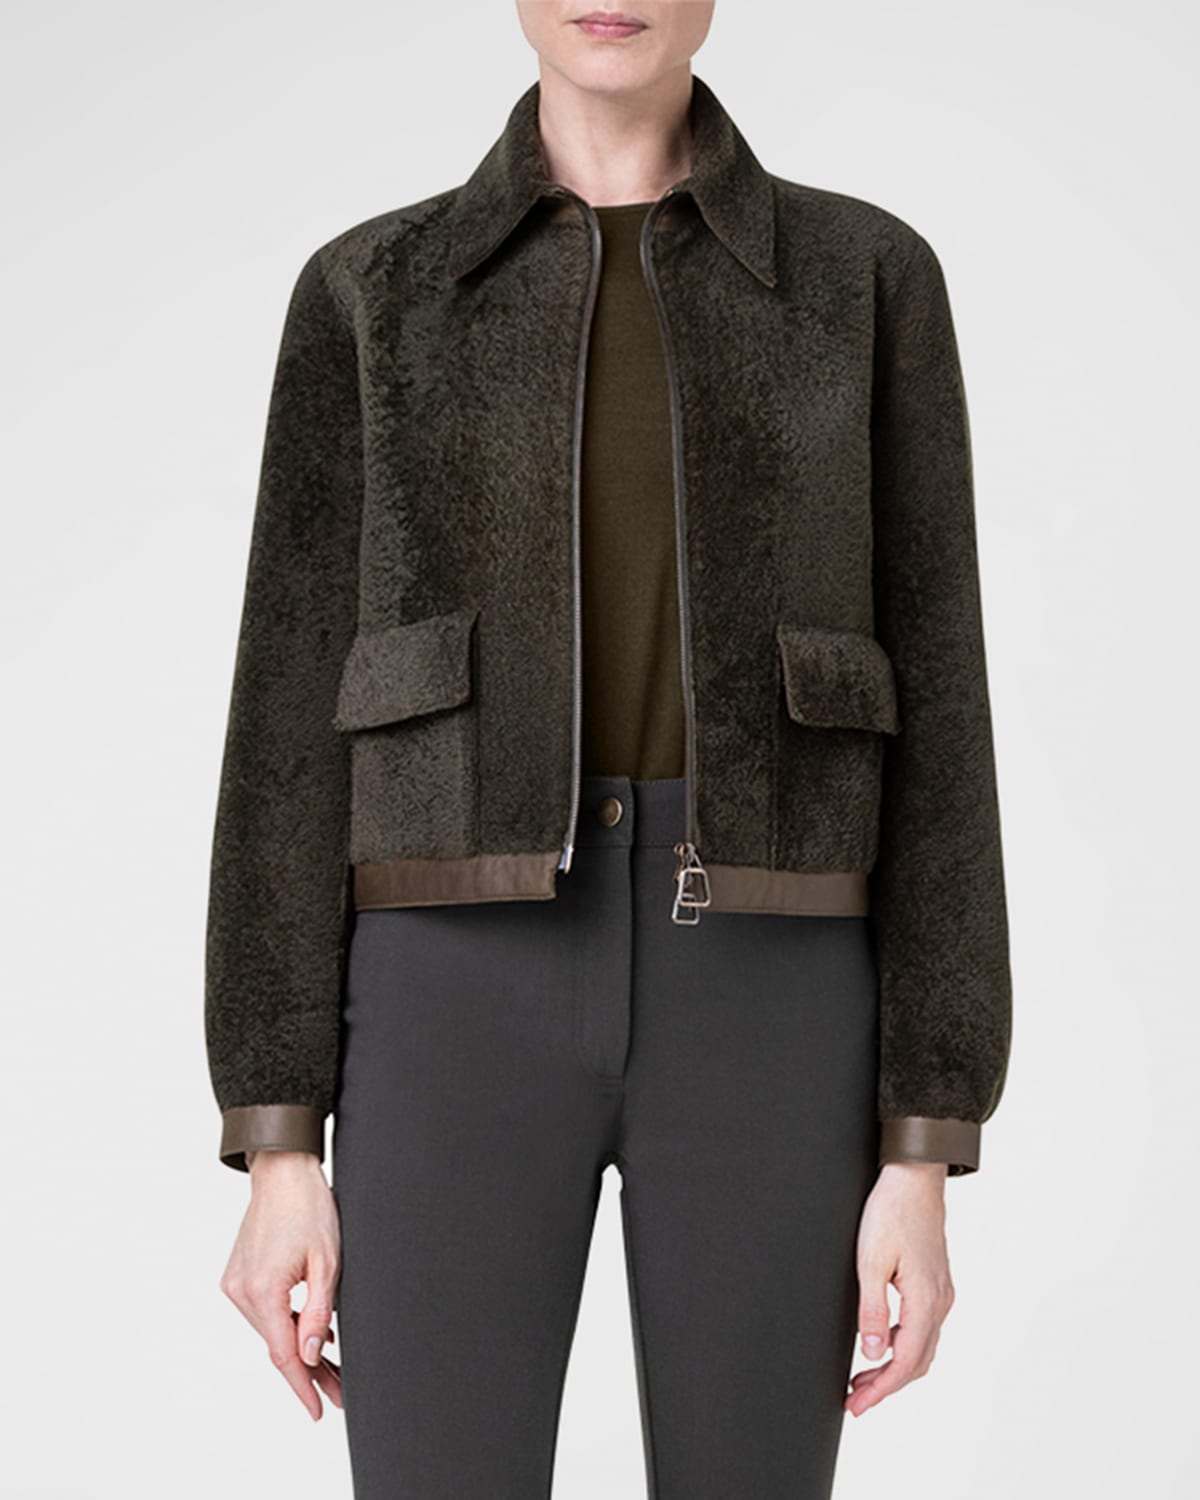 AKRIS SHEARLING SHORT JACKET WITH LEATHER TRIM